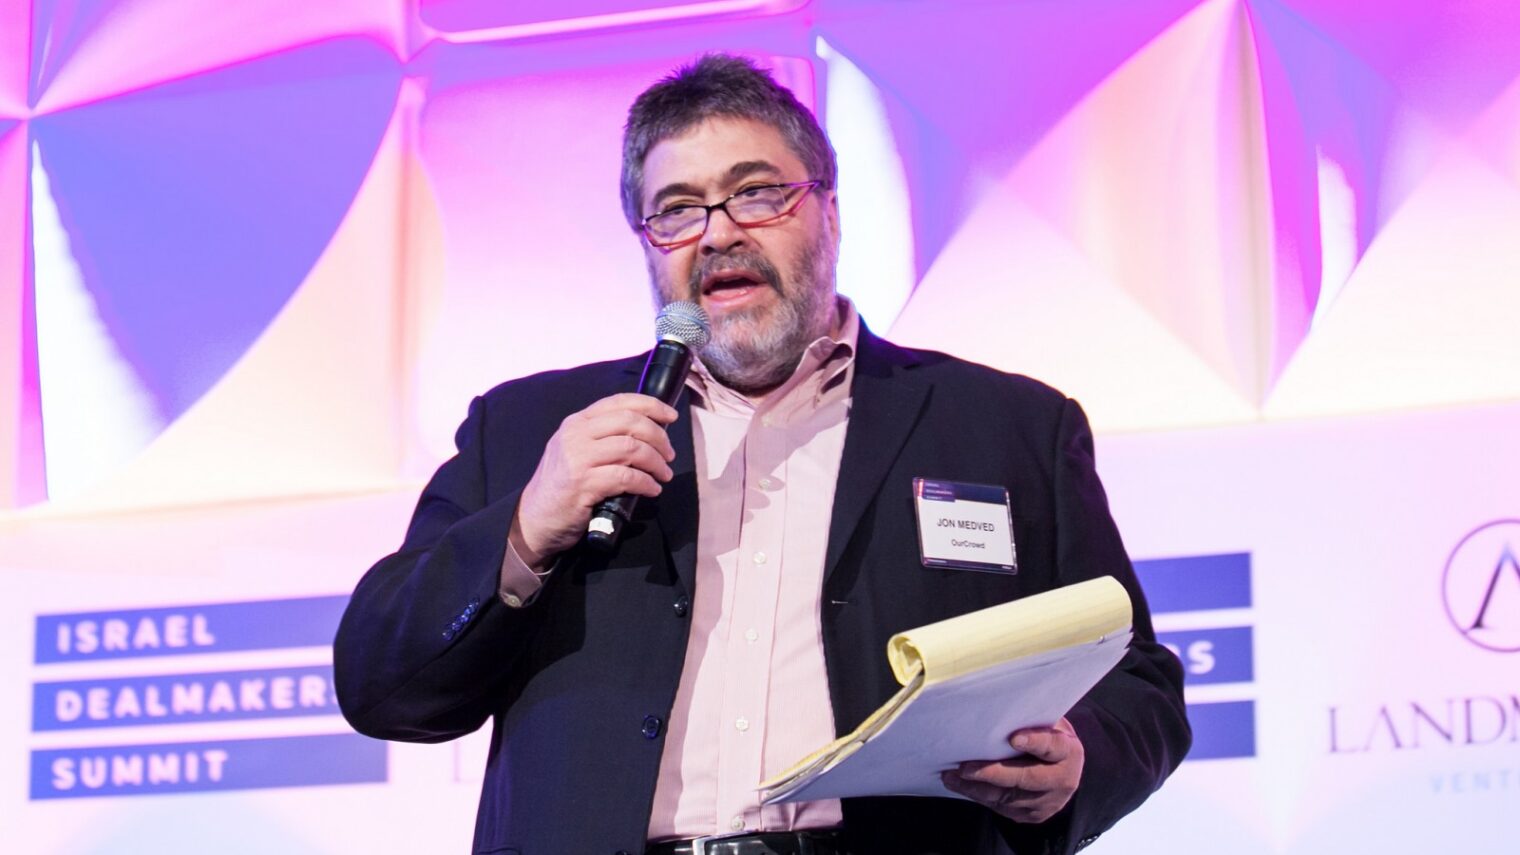 Jon Medved, founder of OurCrowd, speaking at the Israel Dealmakers Summit in New York in March 2014. Photo courtesy.